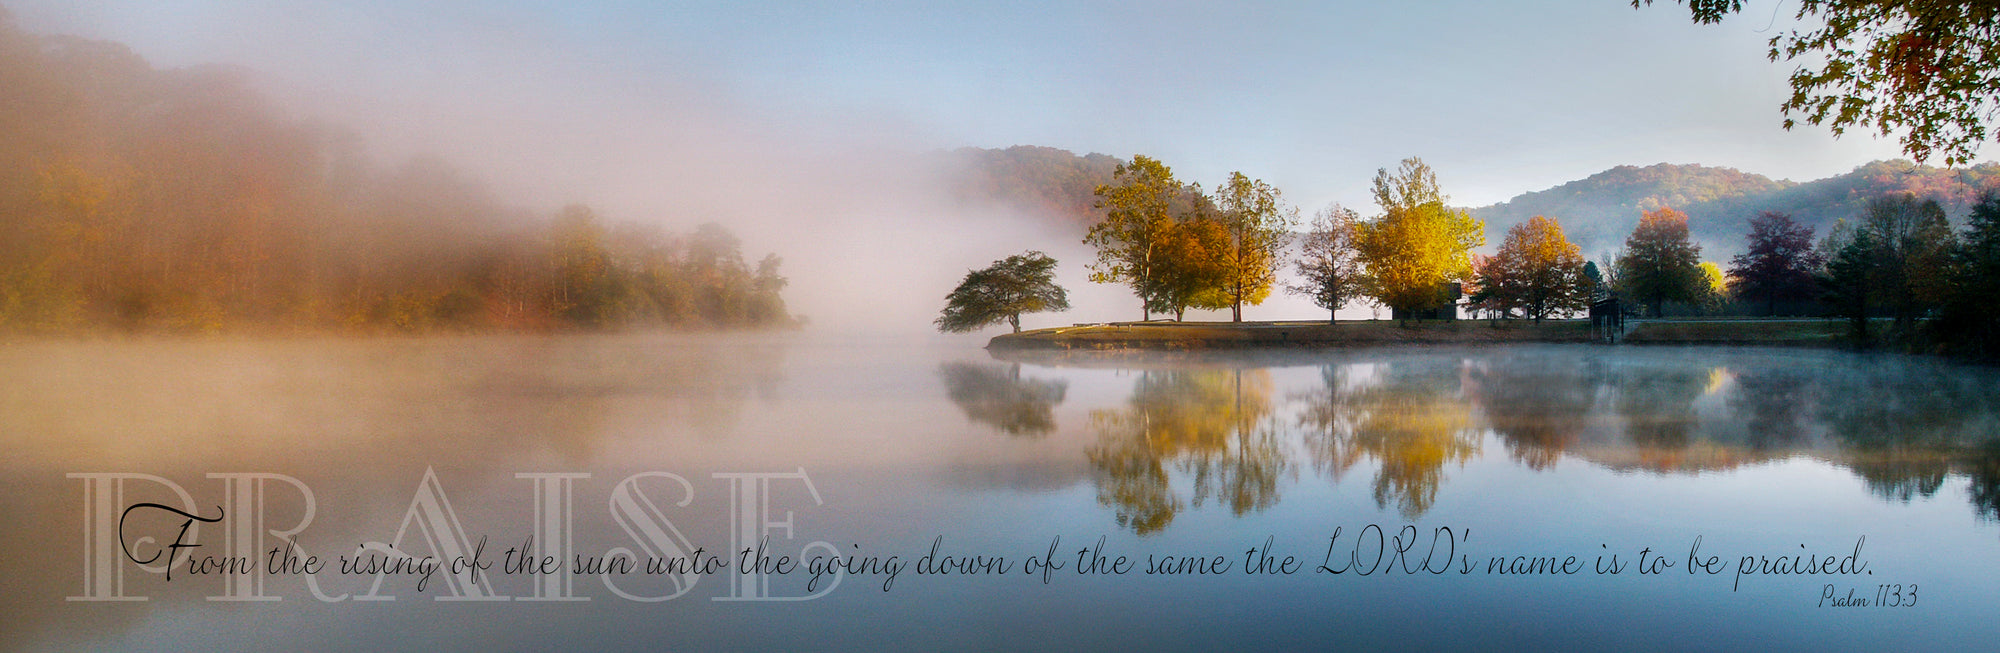 Foggy morning landscape and lake at Beech Fork State with scripture verse.